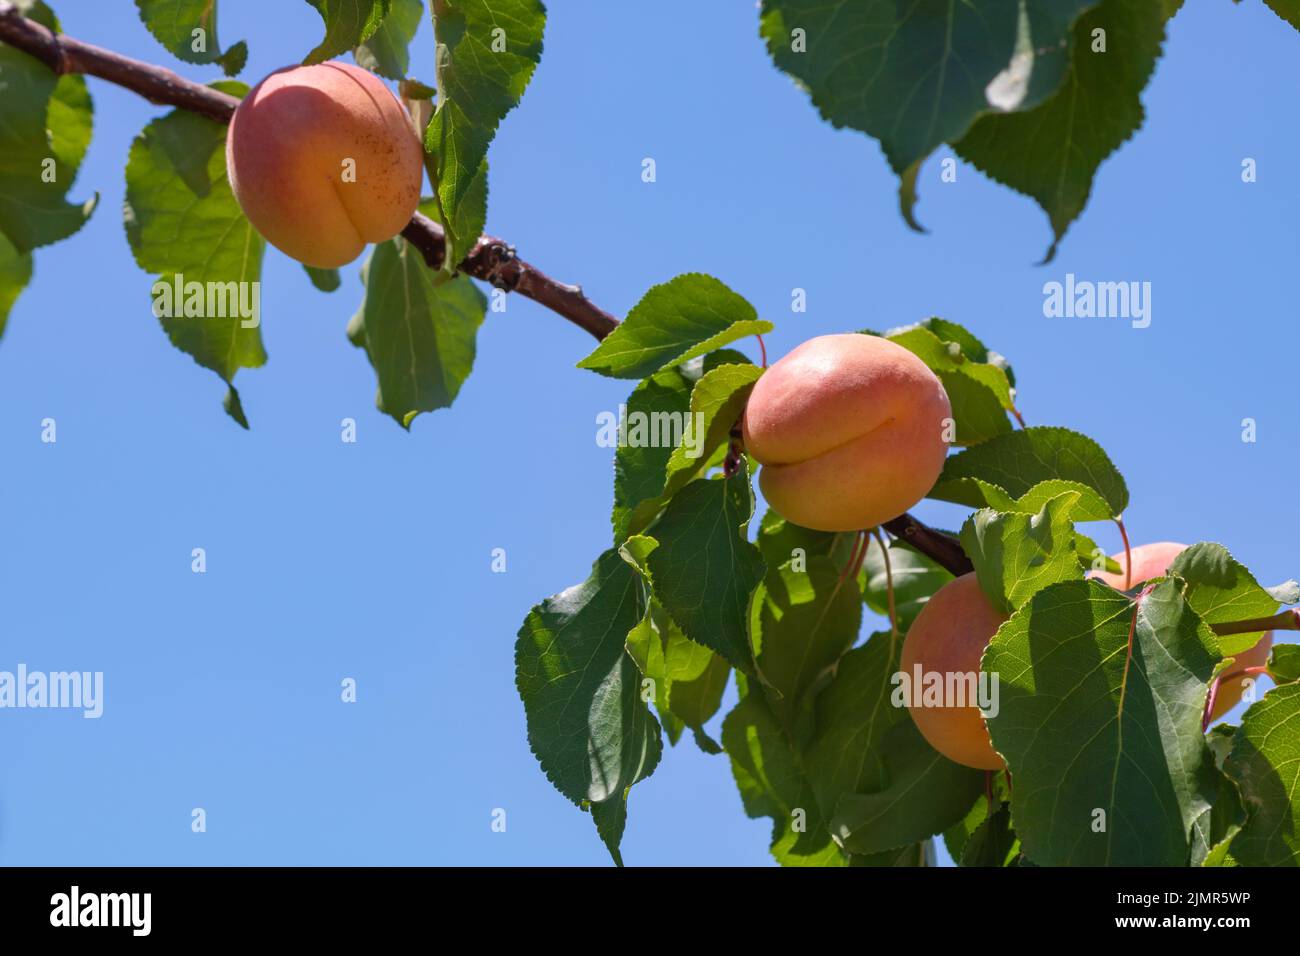 Apricots on the branch. Organic raw fruits background photo. Vegan foods concept. Stock Photo